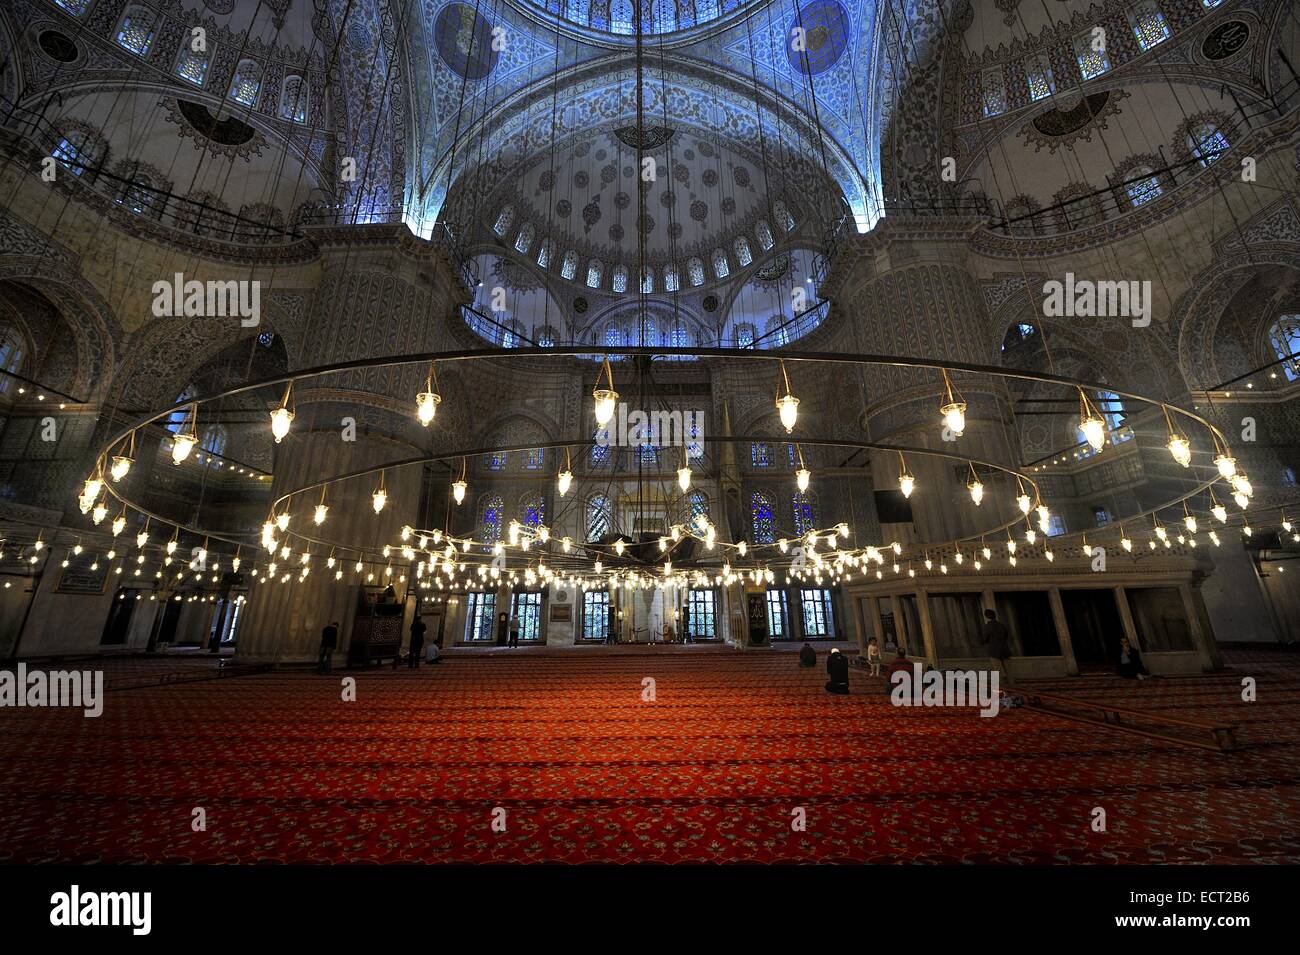 Prayer room with red carpet, Sultan Ahmed Mosque, Sultanahmet, Istanbul, Turkey Stock Photo